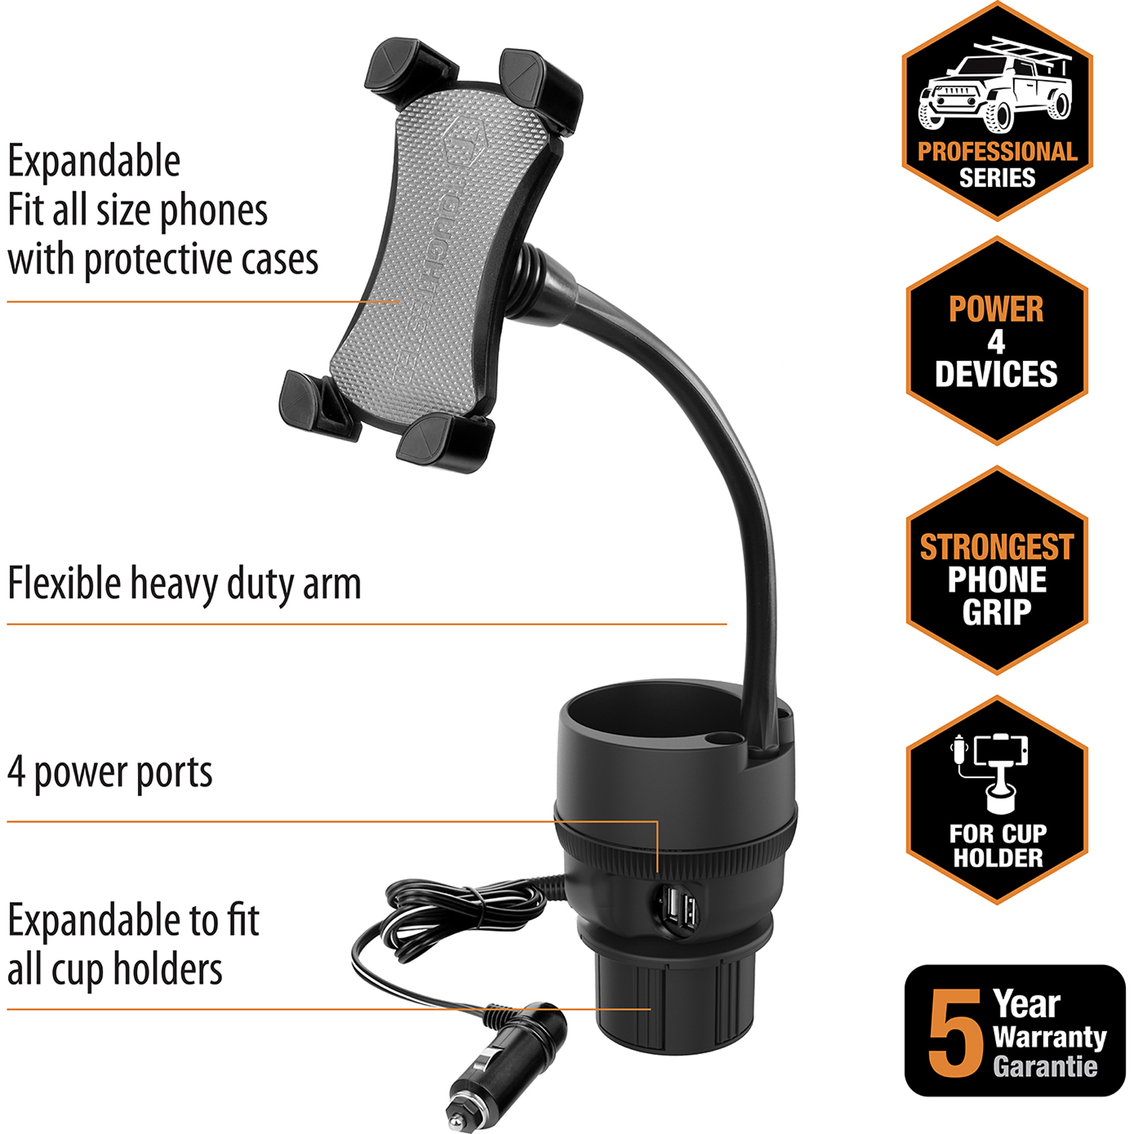 ToughTested Power Cup Holder Mount with Claw Grip - Image 4 of 9